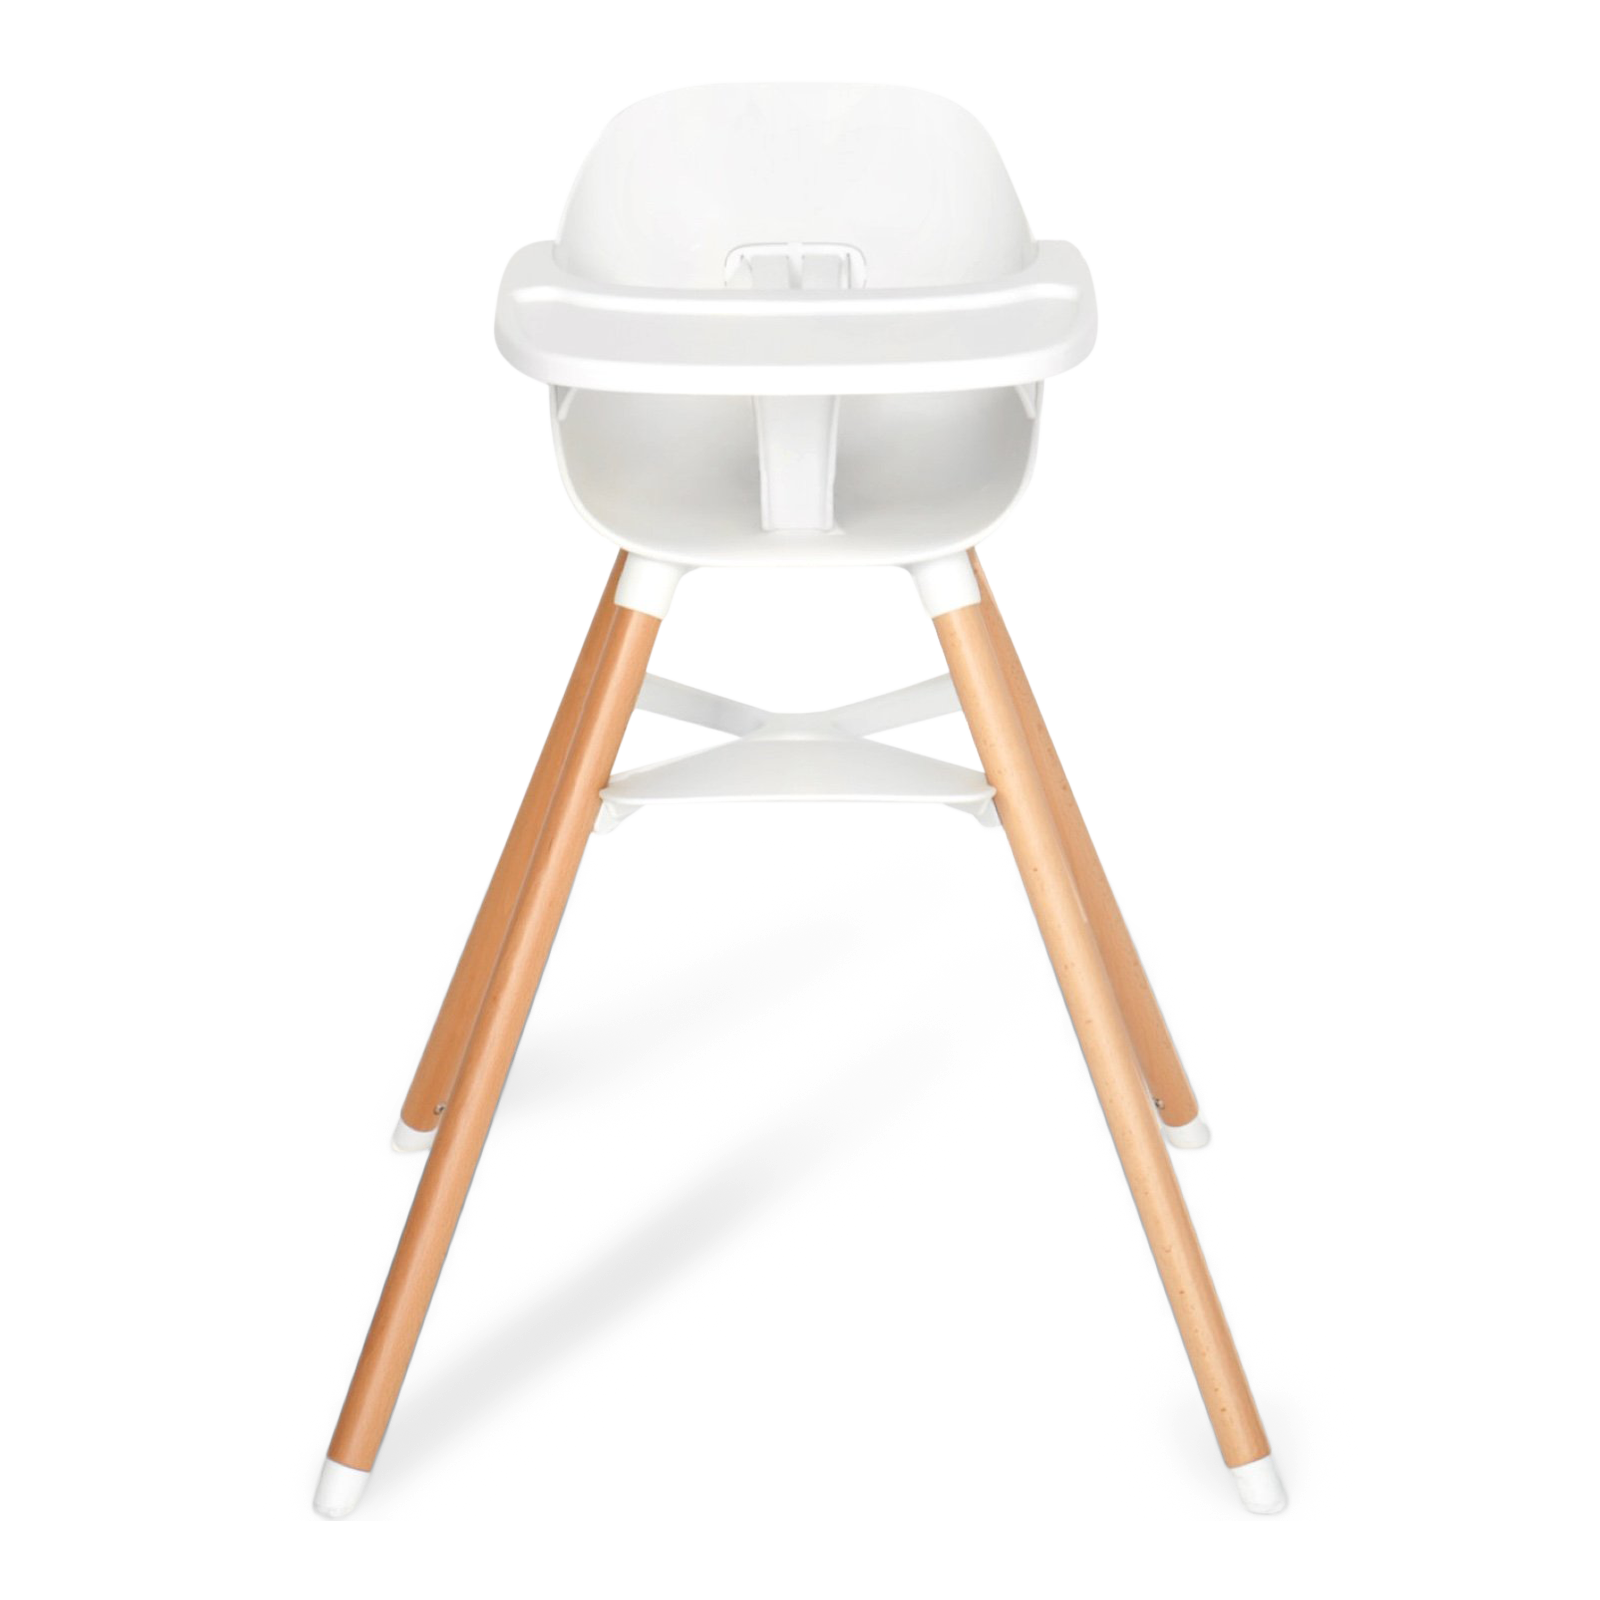 wooden high chair turns into table